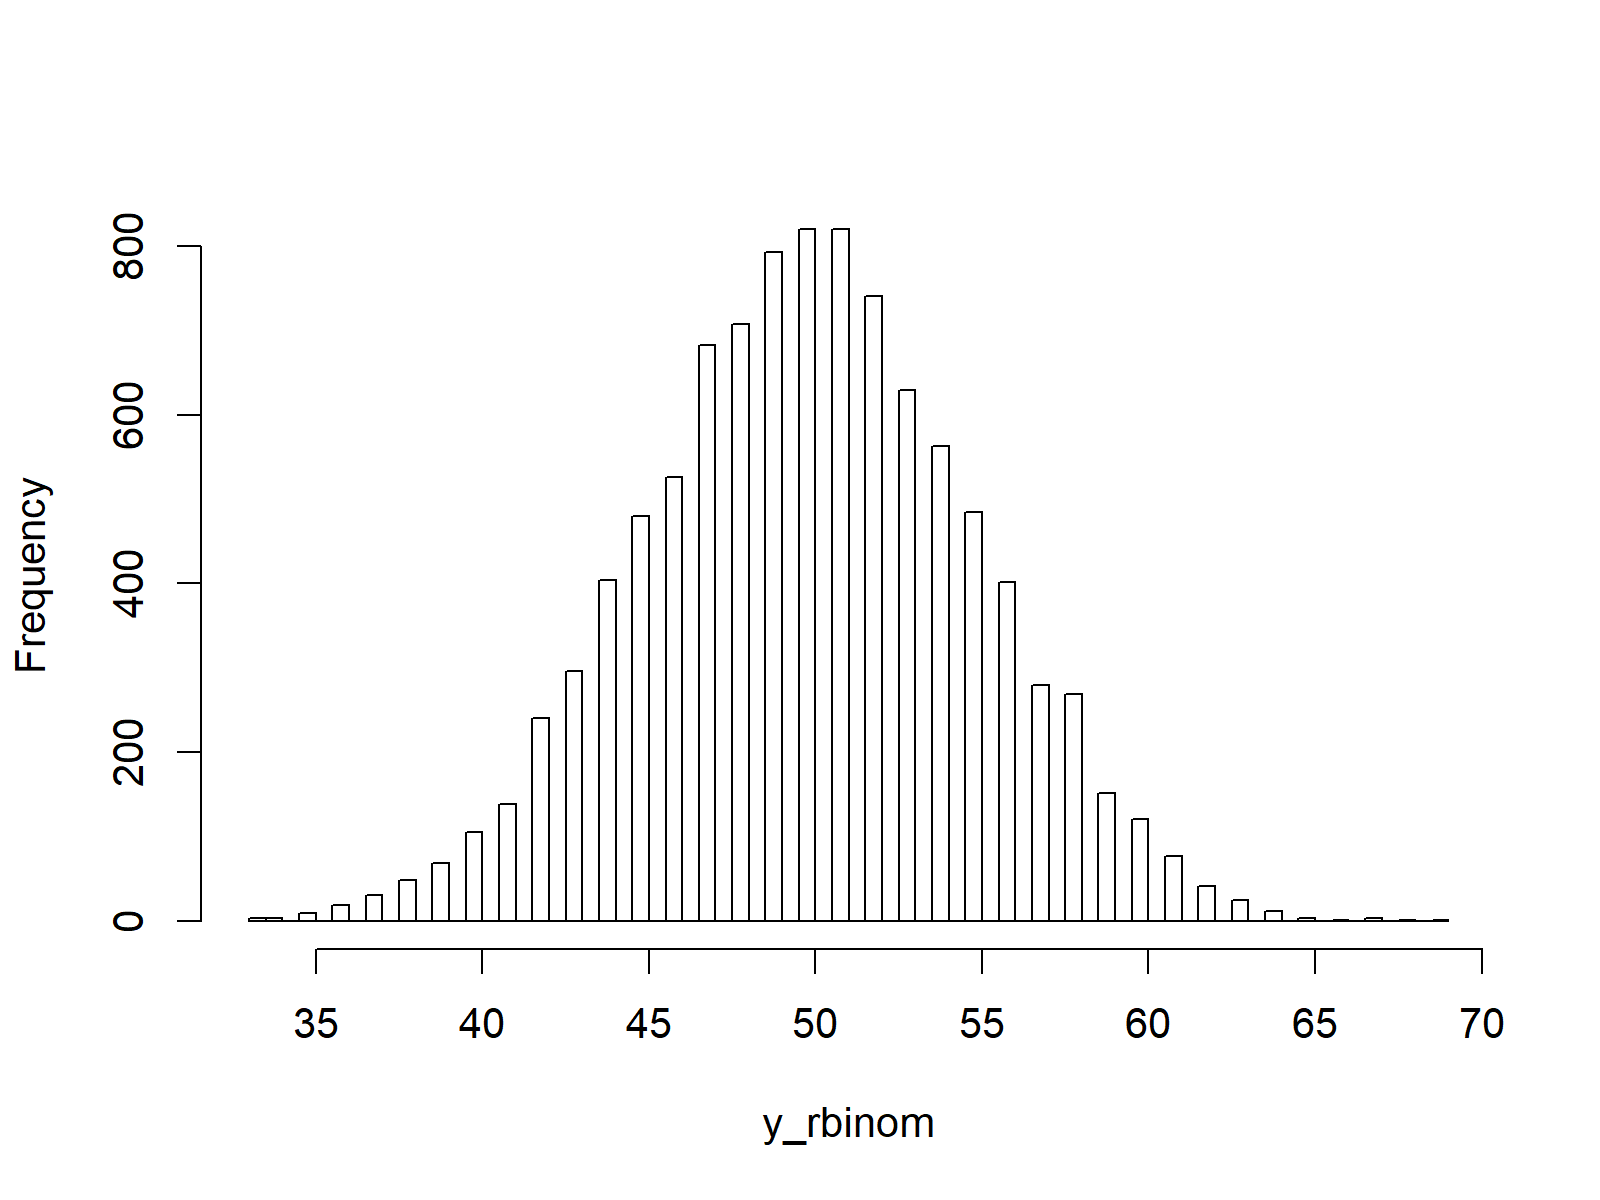 random numbers drawn from binomial distribution plotted in r